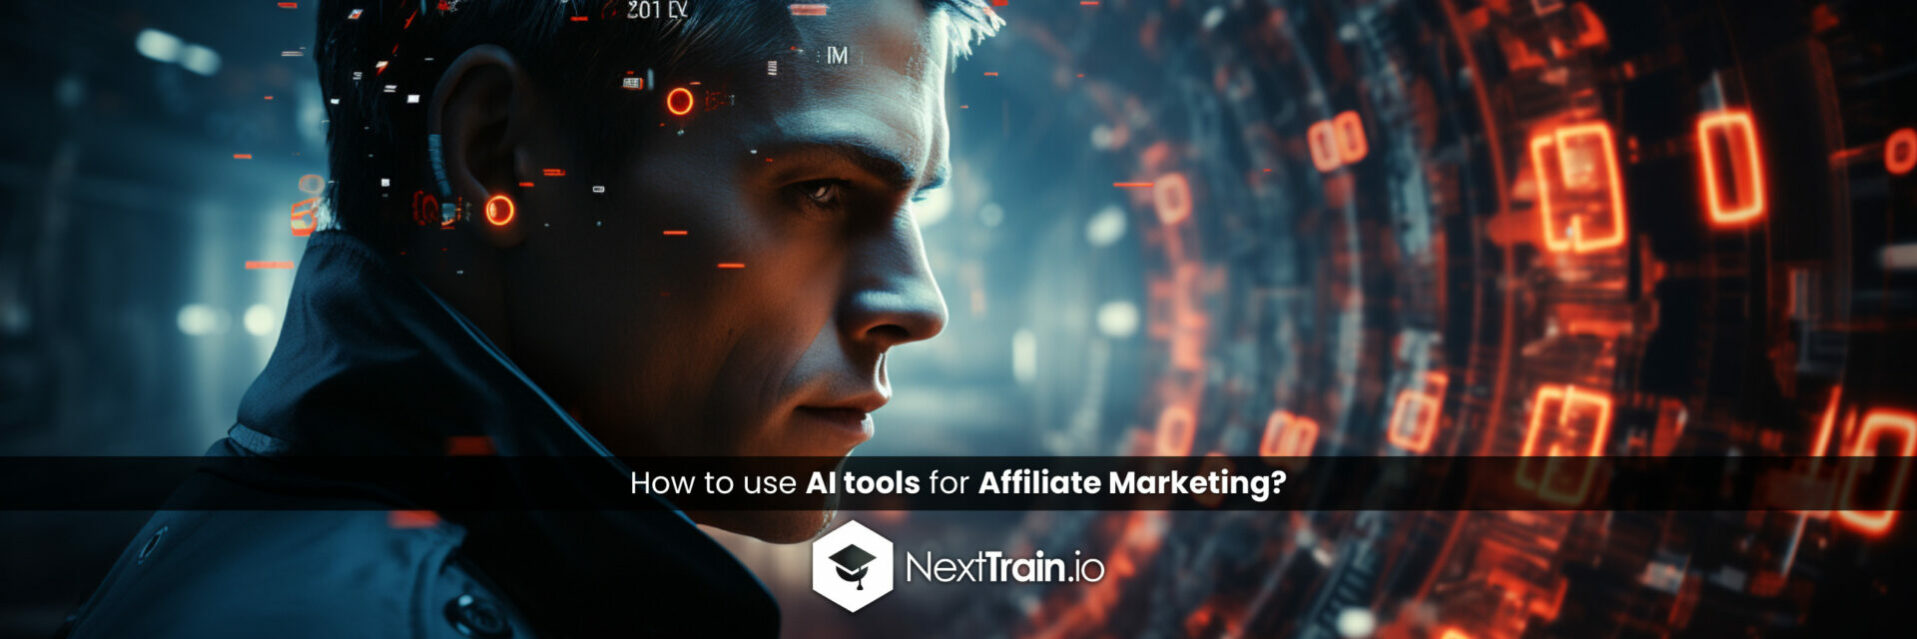 How to use AI tools for Affiliate Marketing?